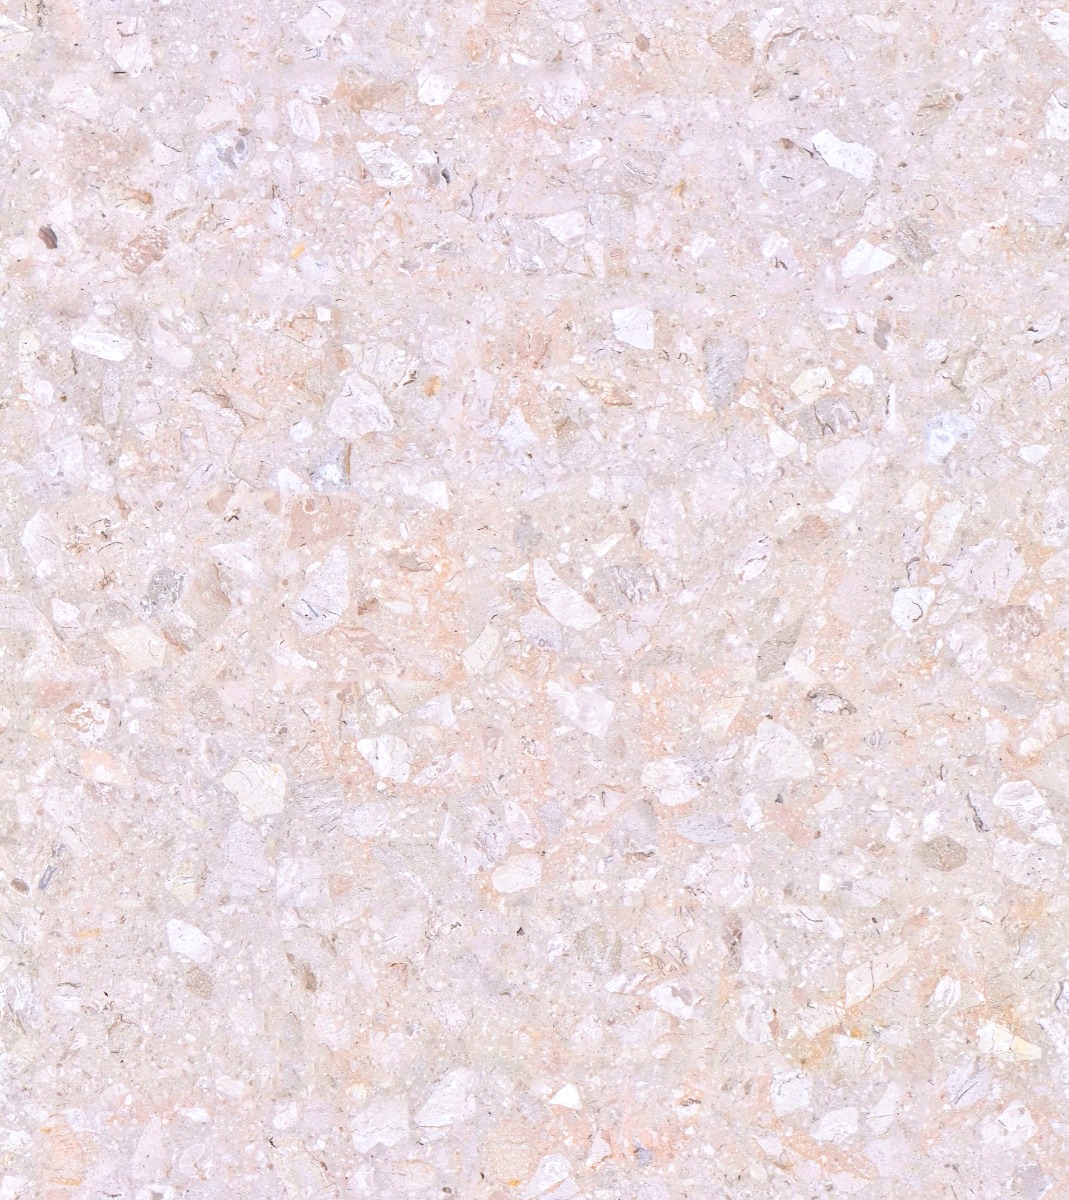 A seamless terrazzo texture with sabbia terrazzo units arranged in a None pattern